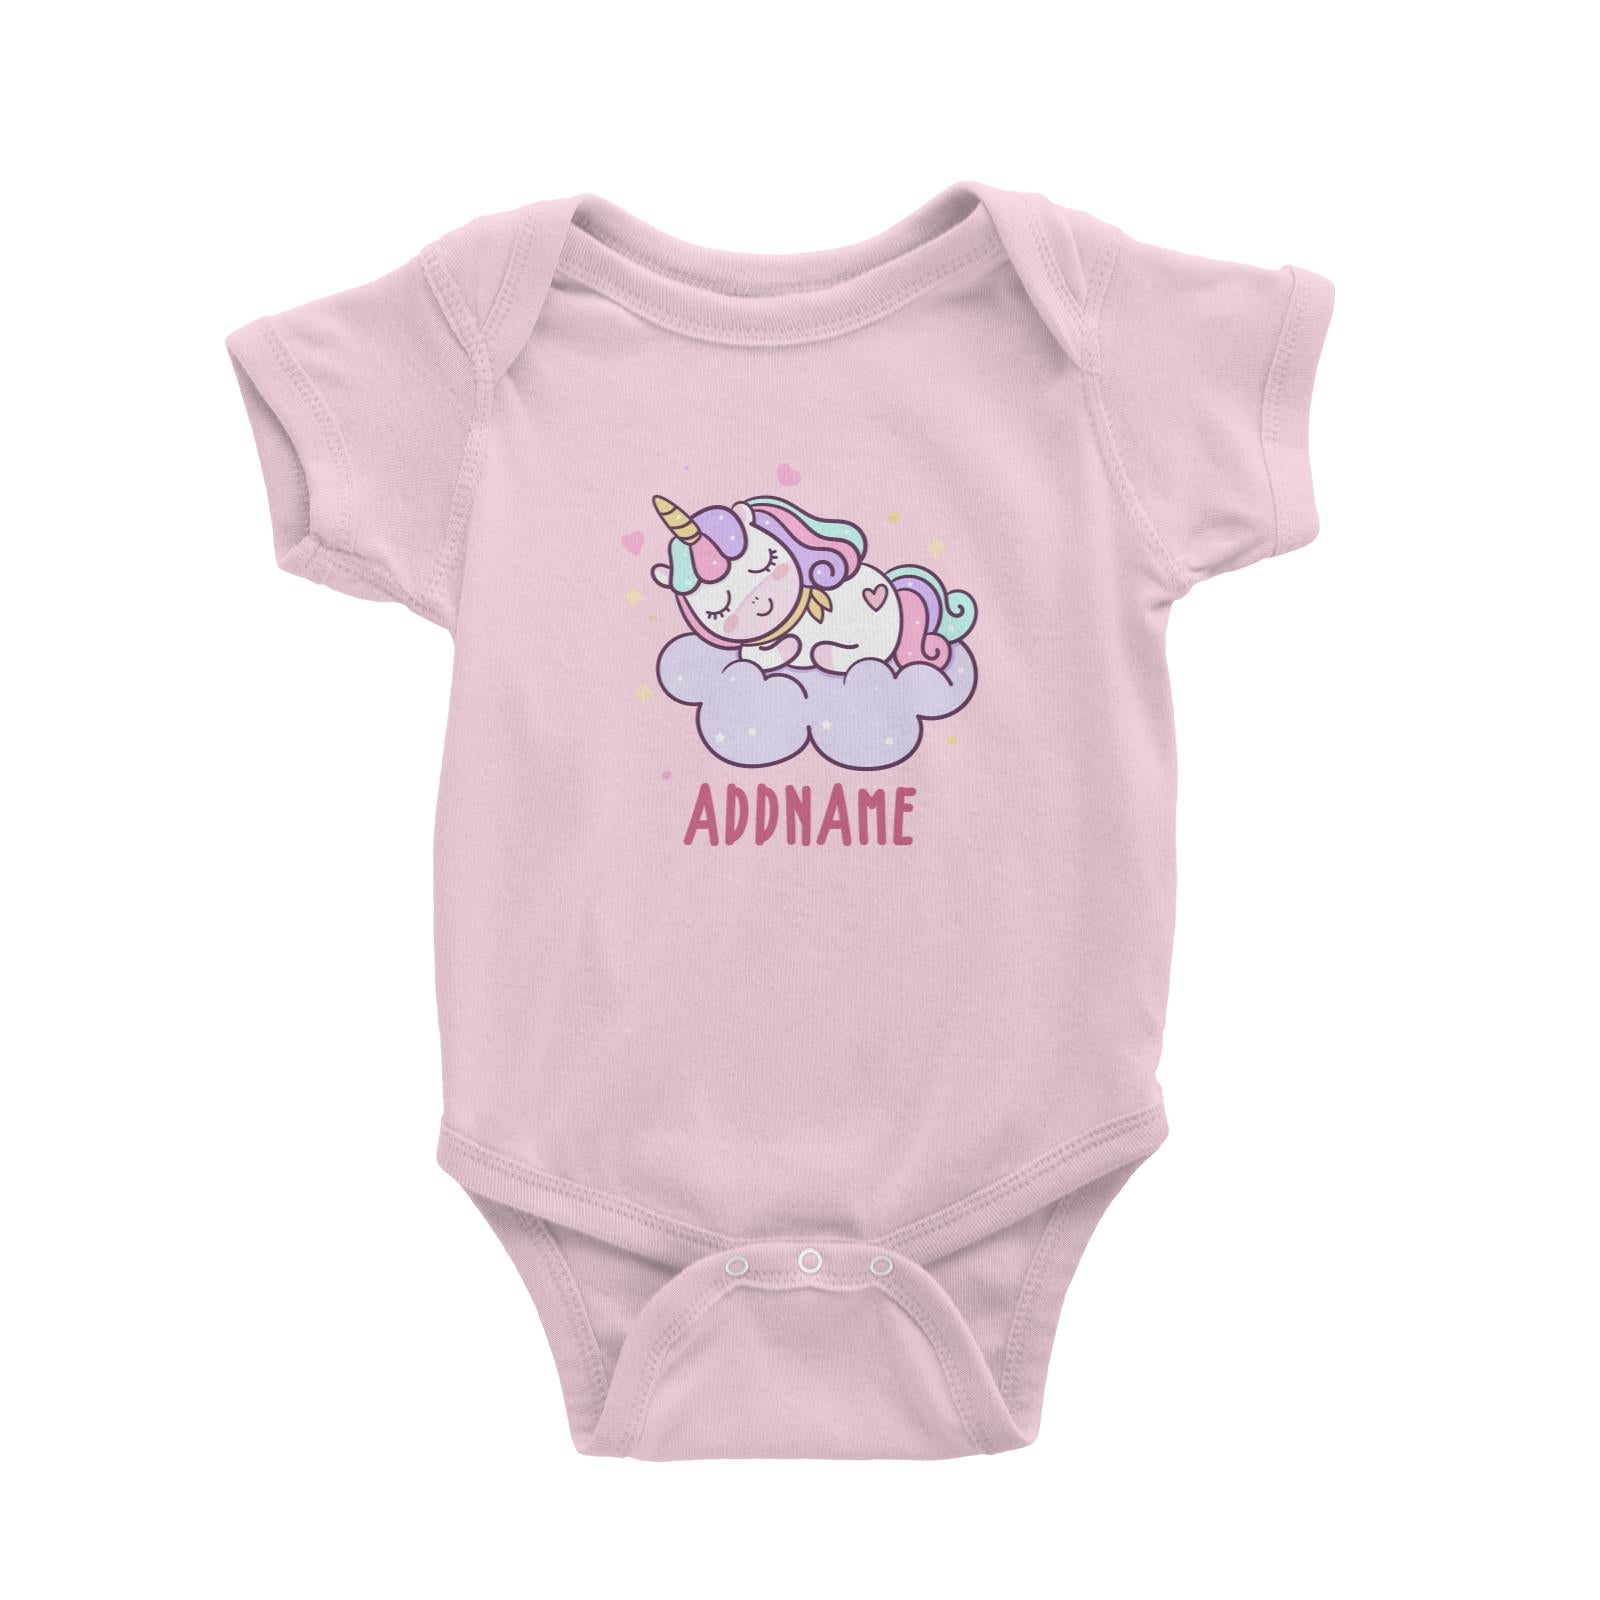 Unicorn And Princess Series Cute Pastel Sleeping Unicorn On a Cloud Addname Baby Romper